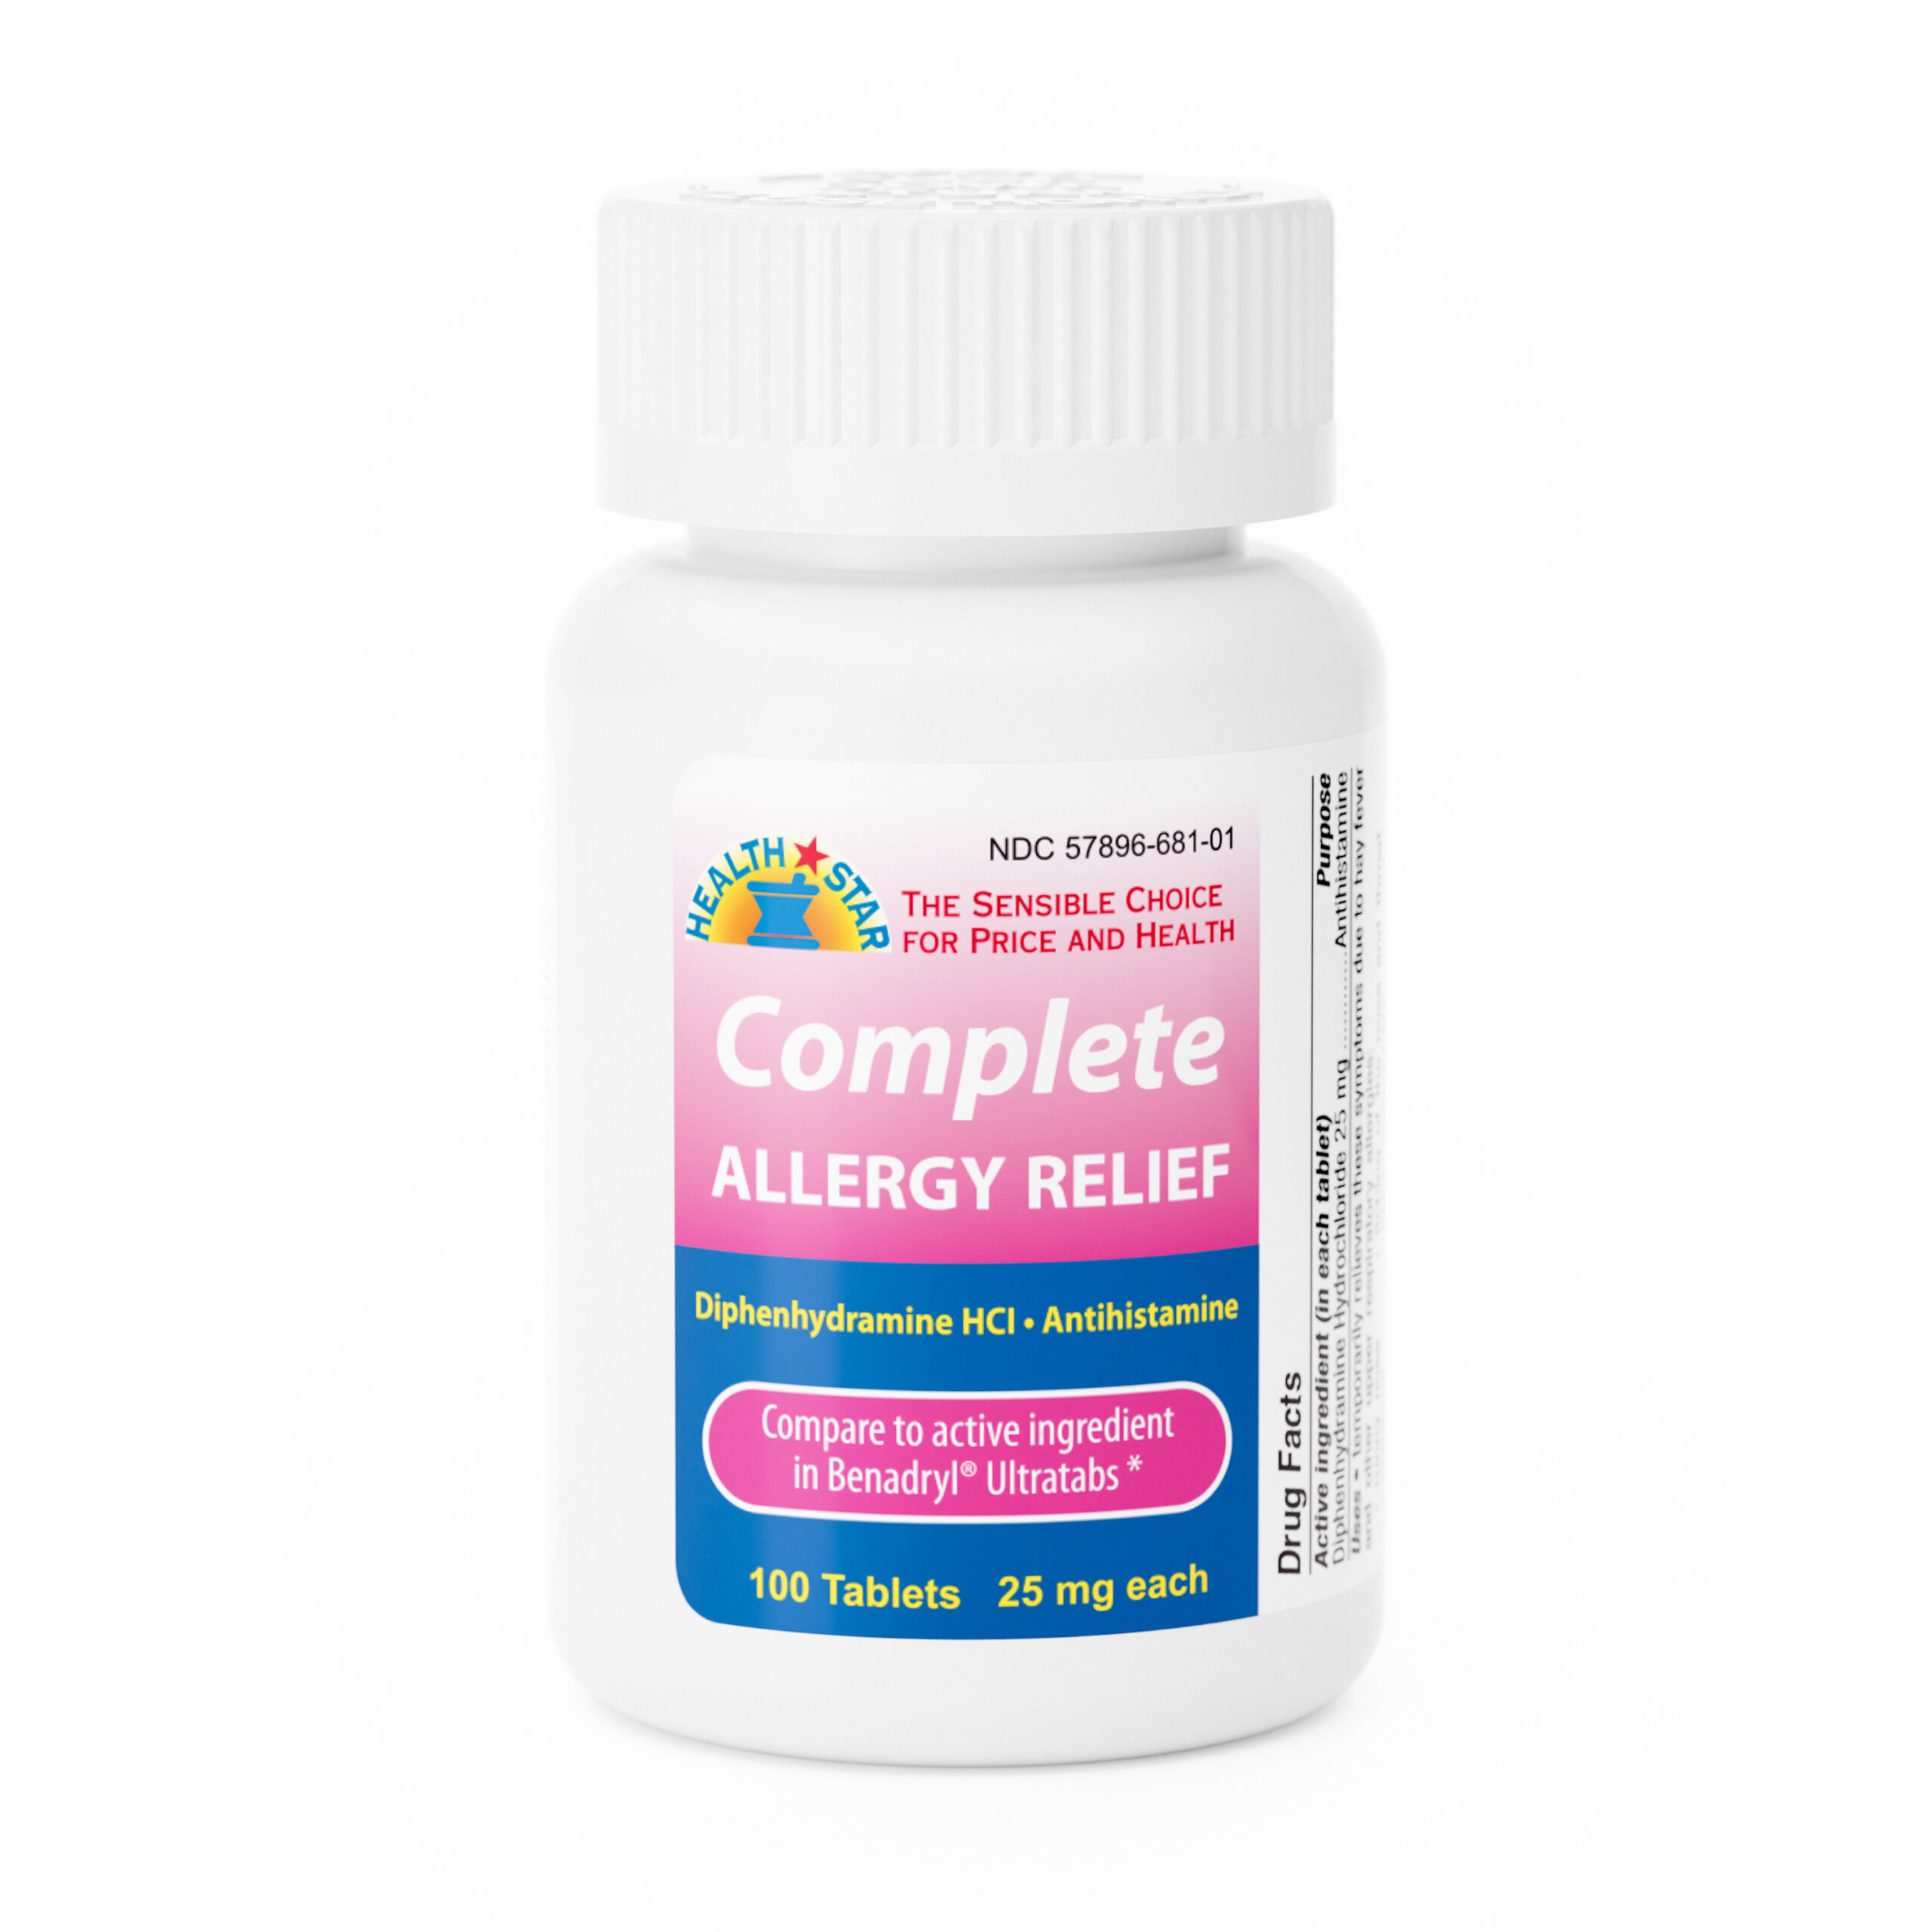 Complete Allergy Relief – 100 Tablets